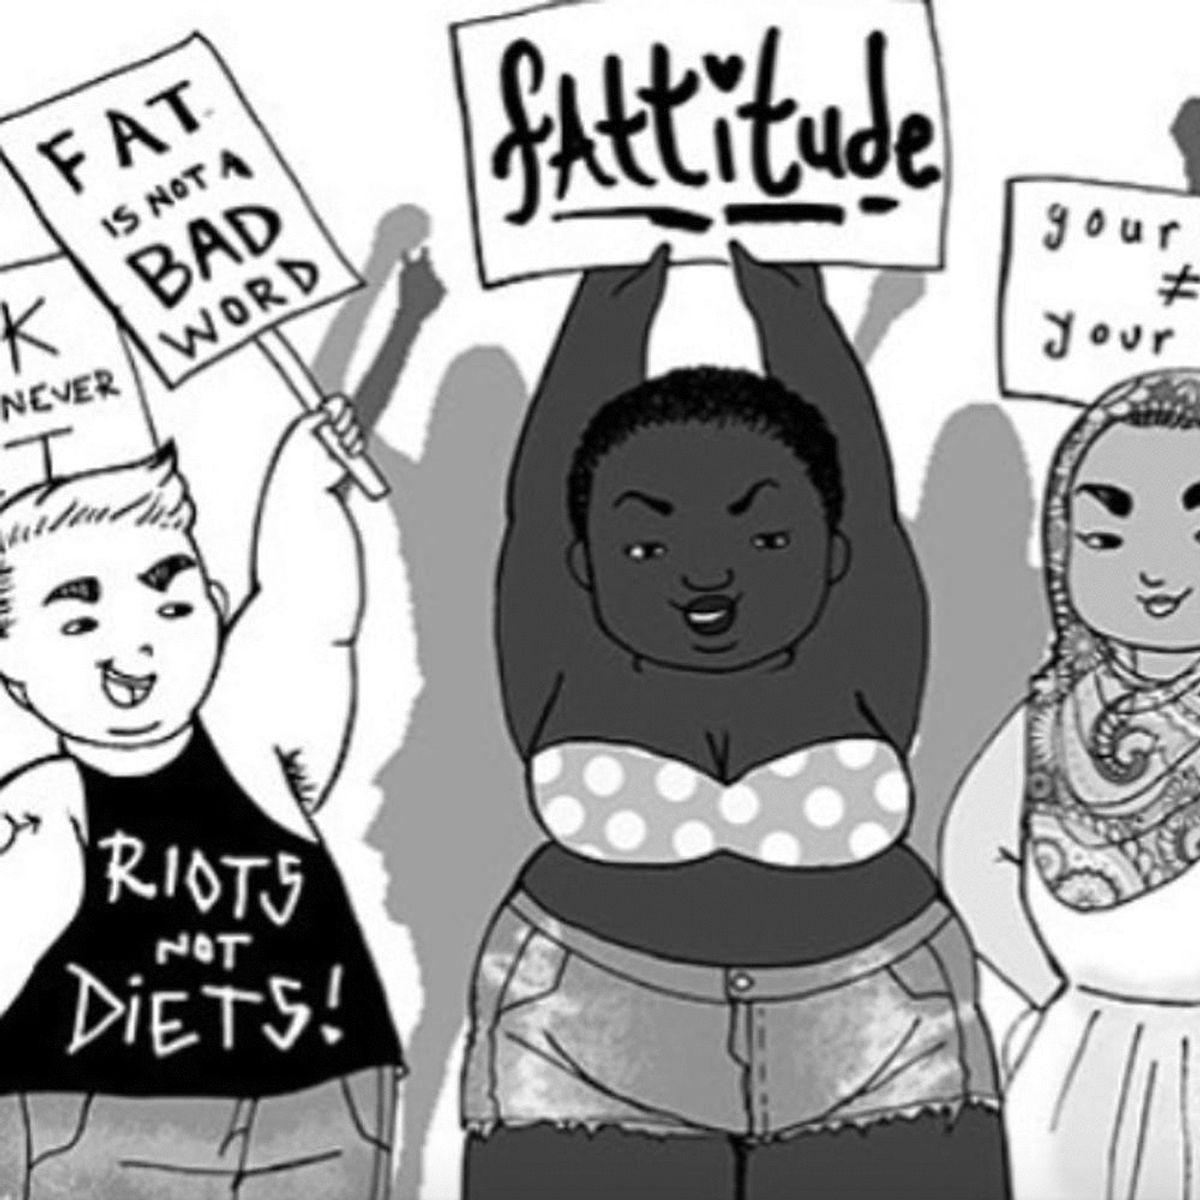 New Documentary “Fattitude” Says This Is What’s Wrong With the Body Positive Movement